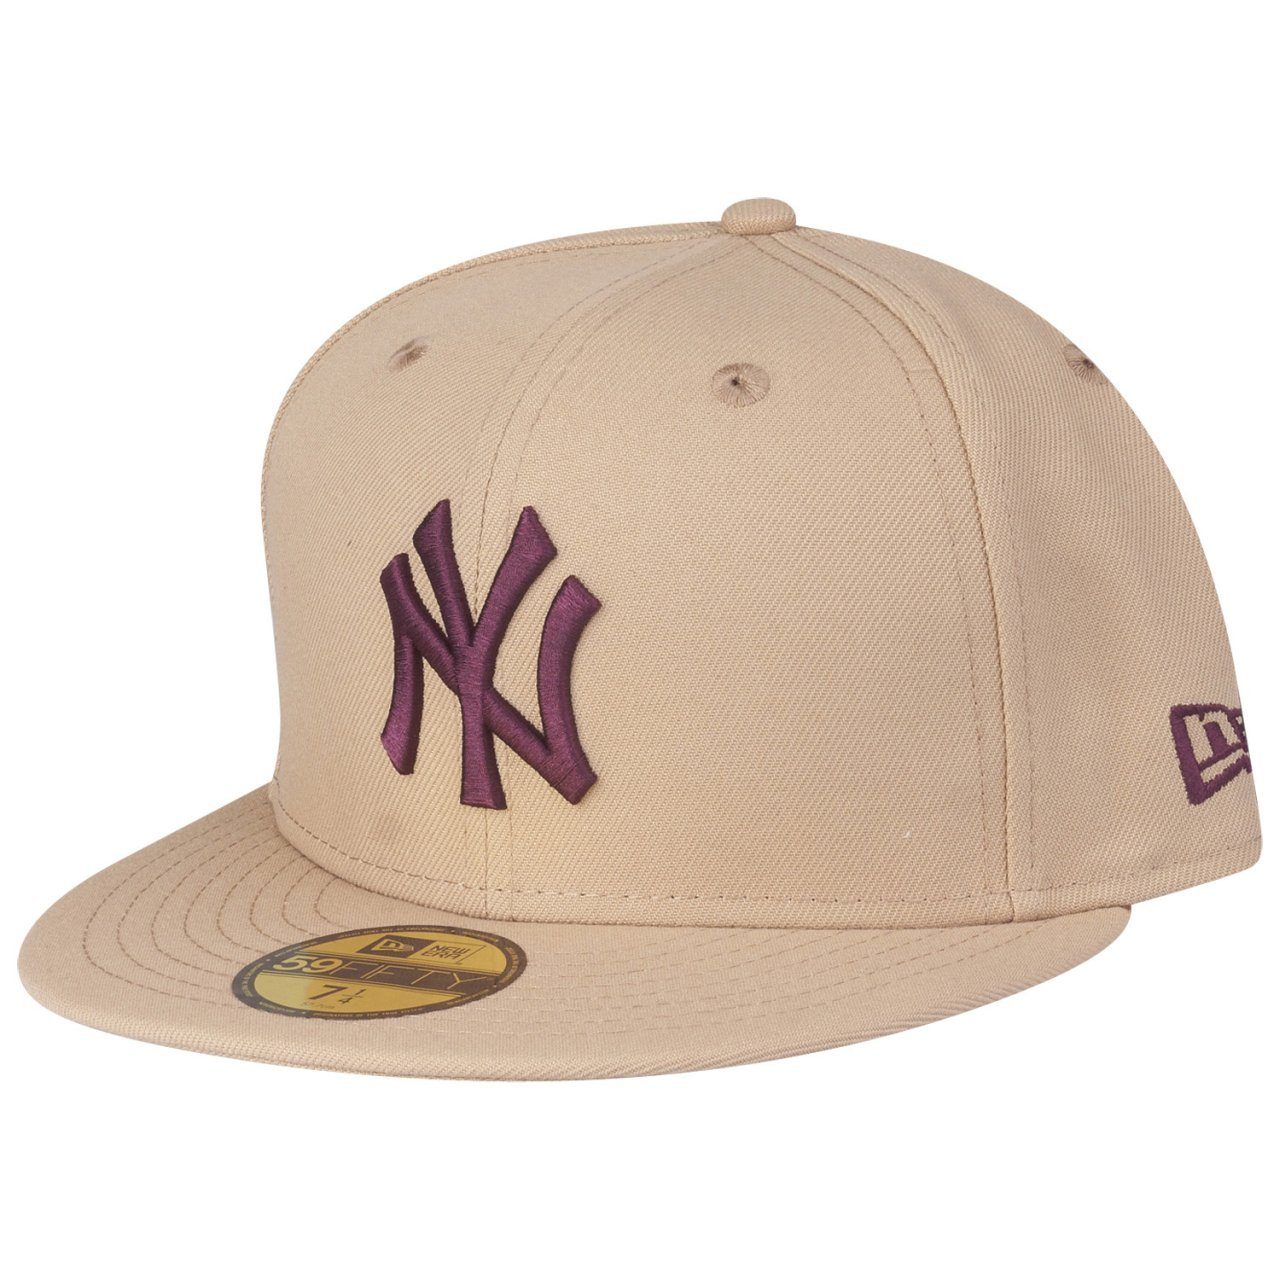 Yankees Cap York Era Fitted New MLB New 59Fifty